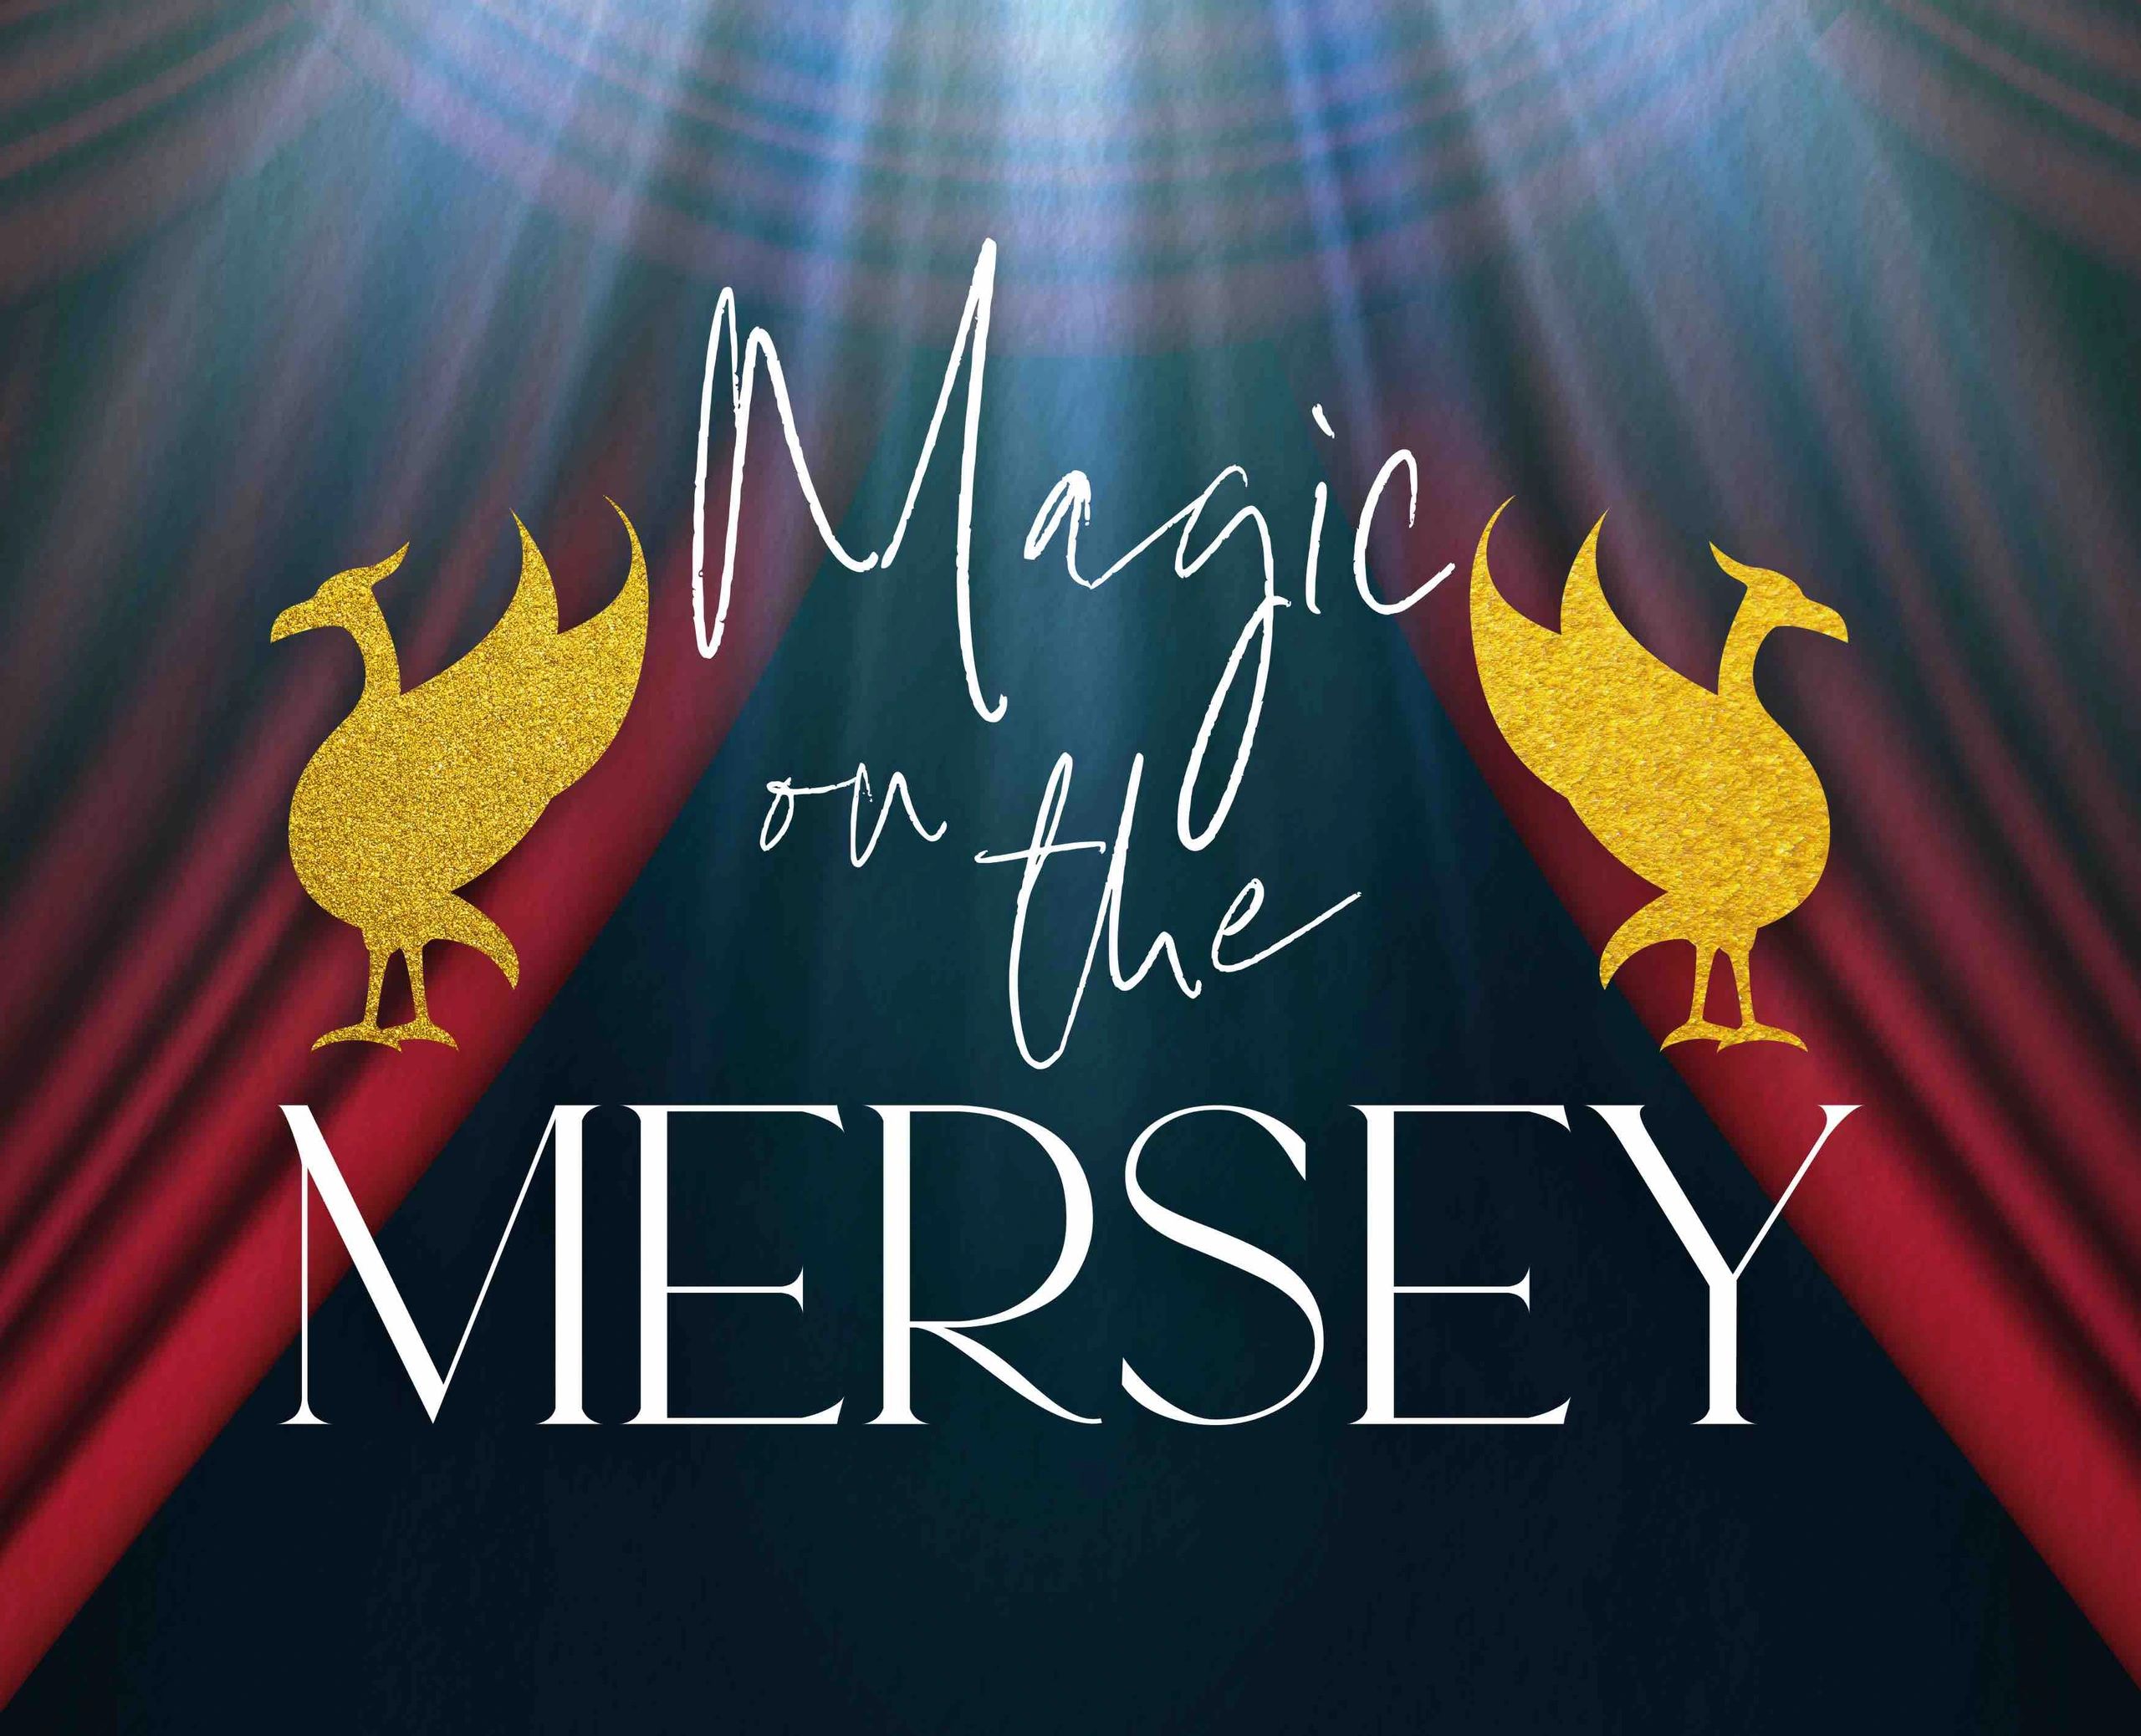 The logo for "Magic on the Mersey" in Liverpool, featuring the two iconic Liver birds